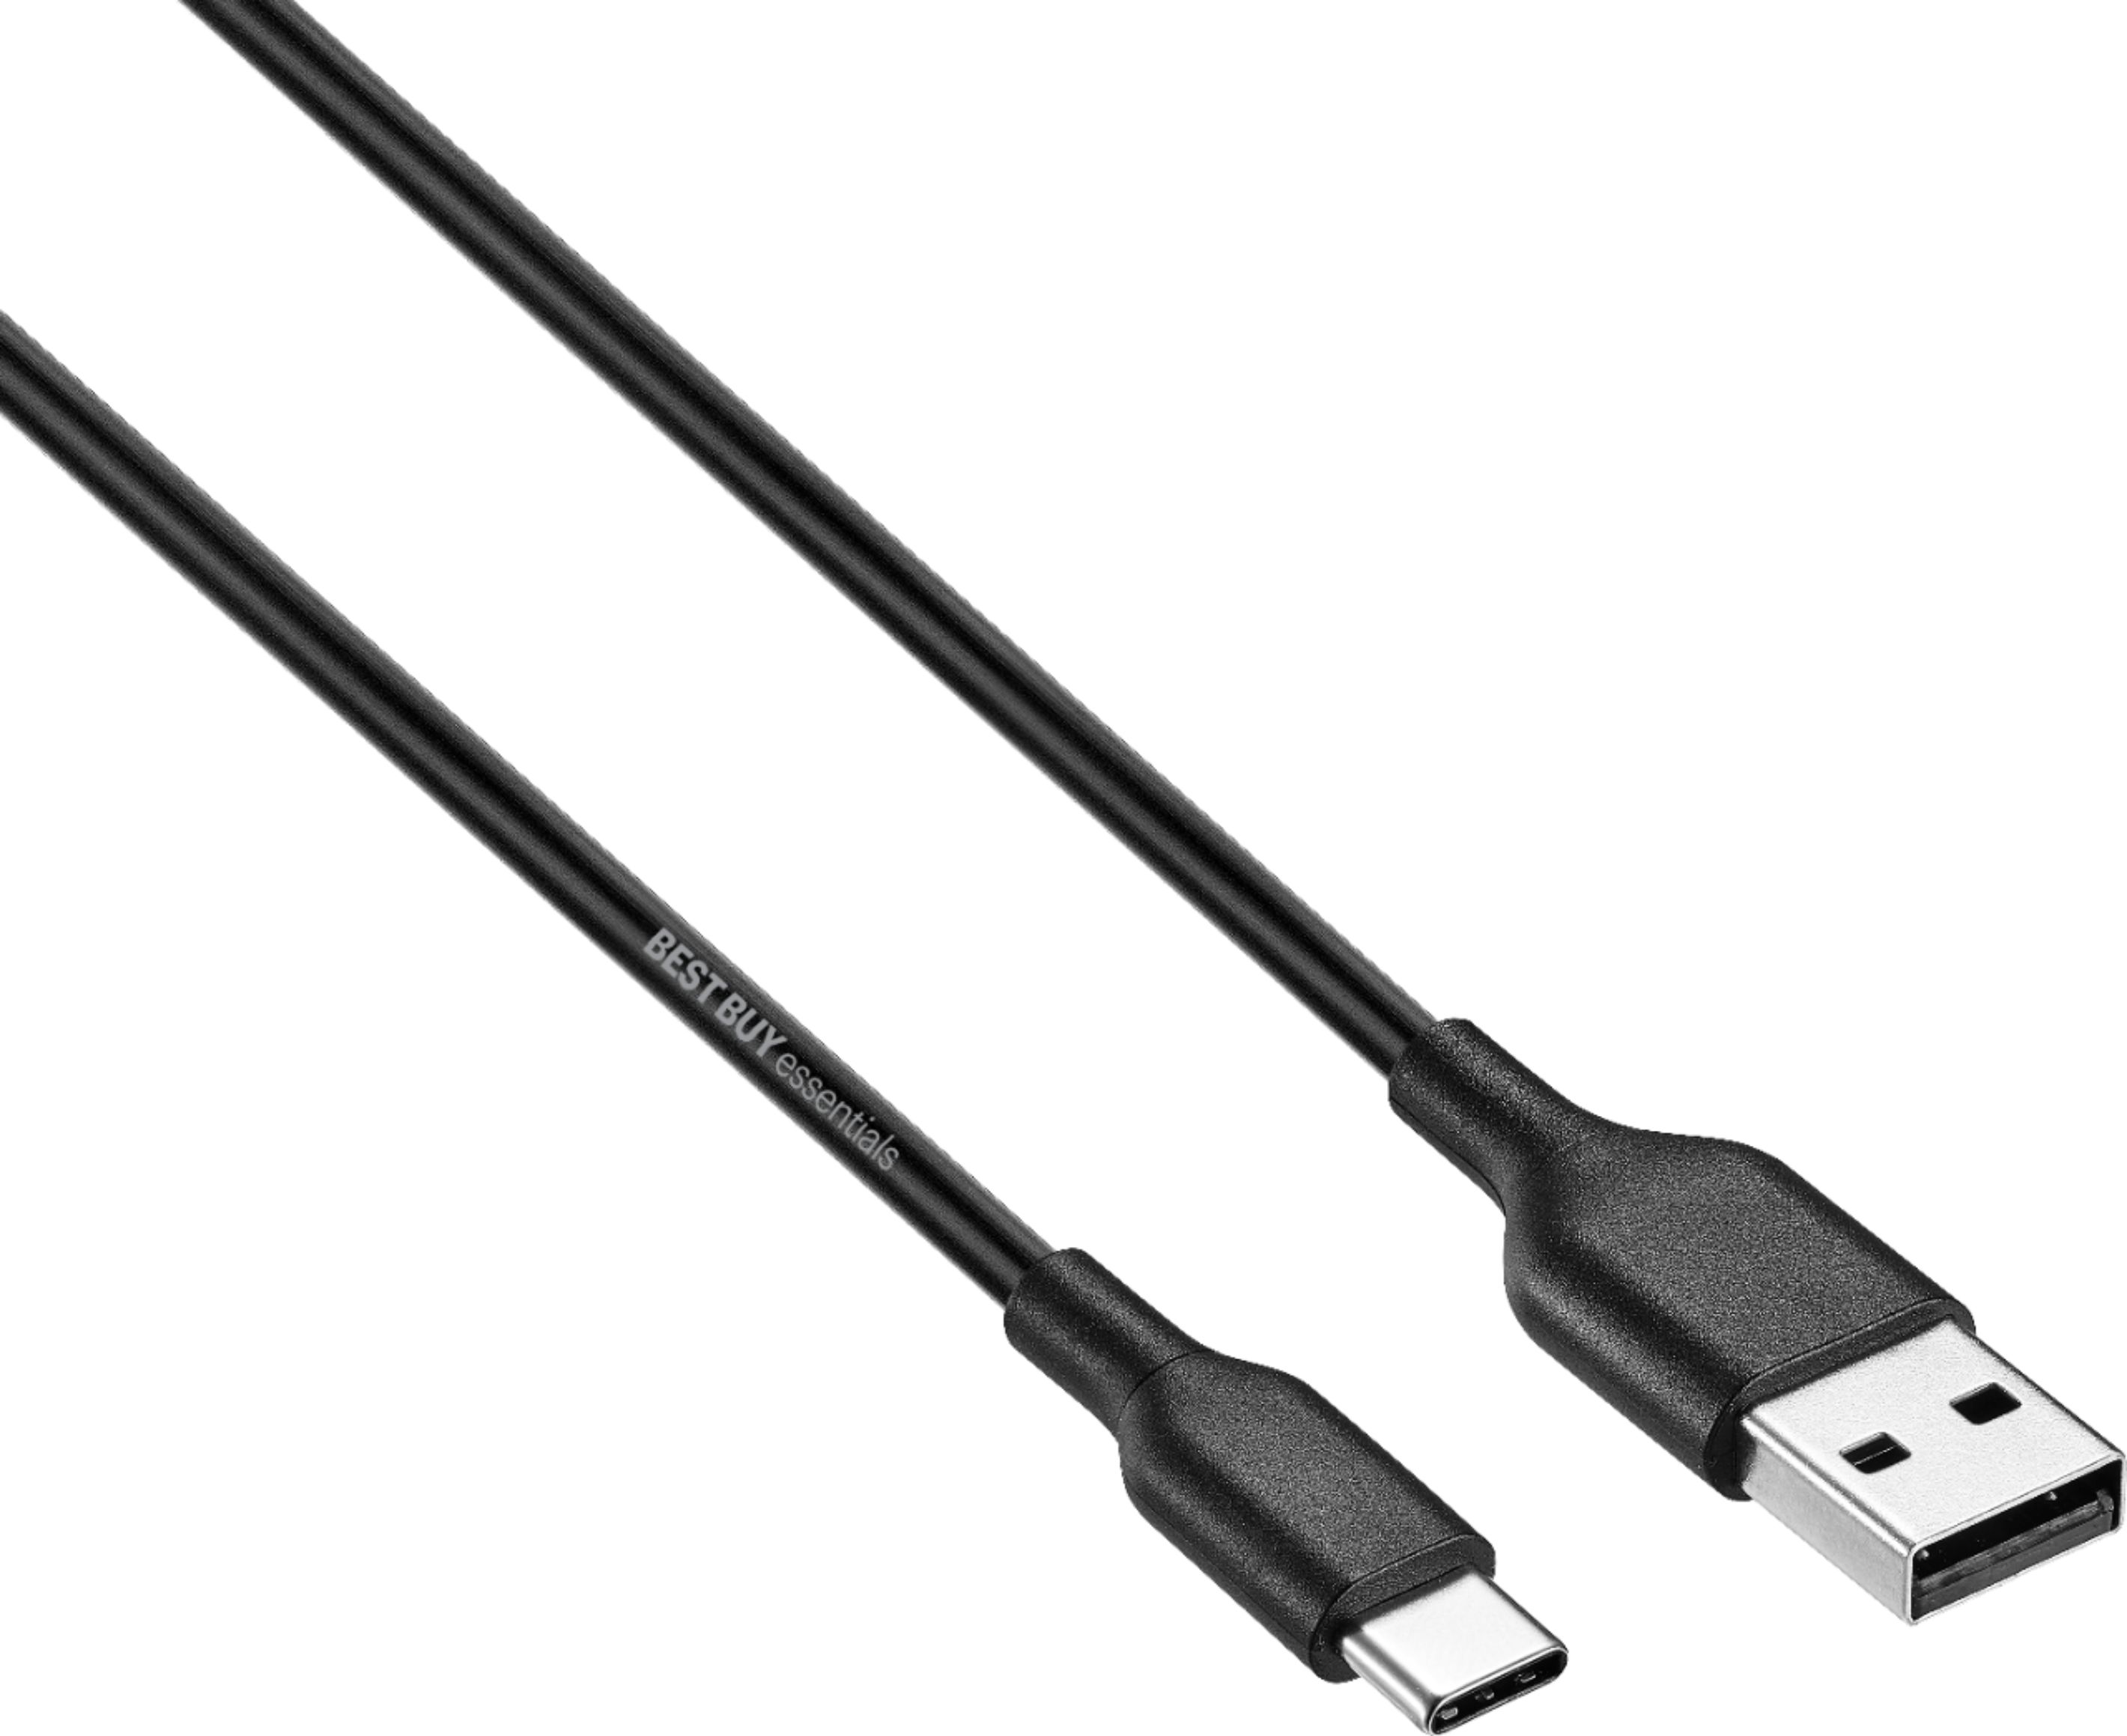 Humanista interferencia Botánico Best Buy essentials™ 5' USB-C to USB Charge-and-Sync Cable Black BE-MCA522K  - Best Buy